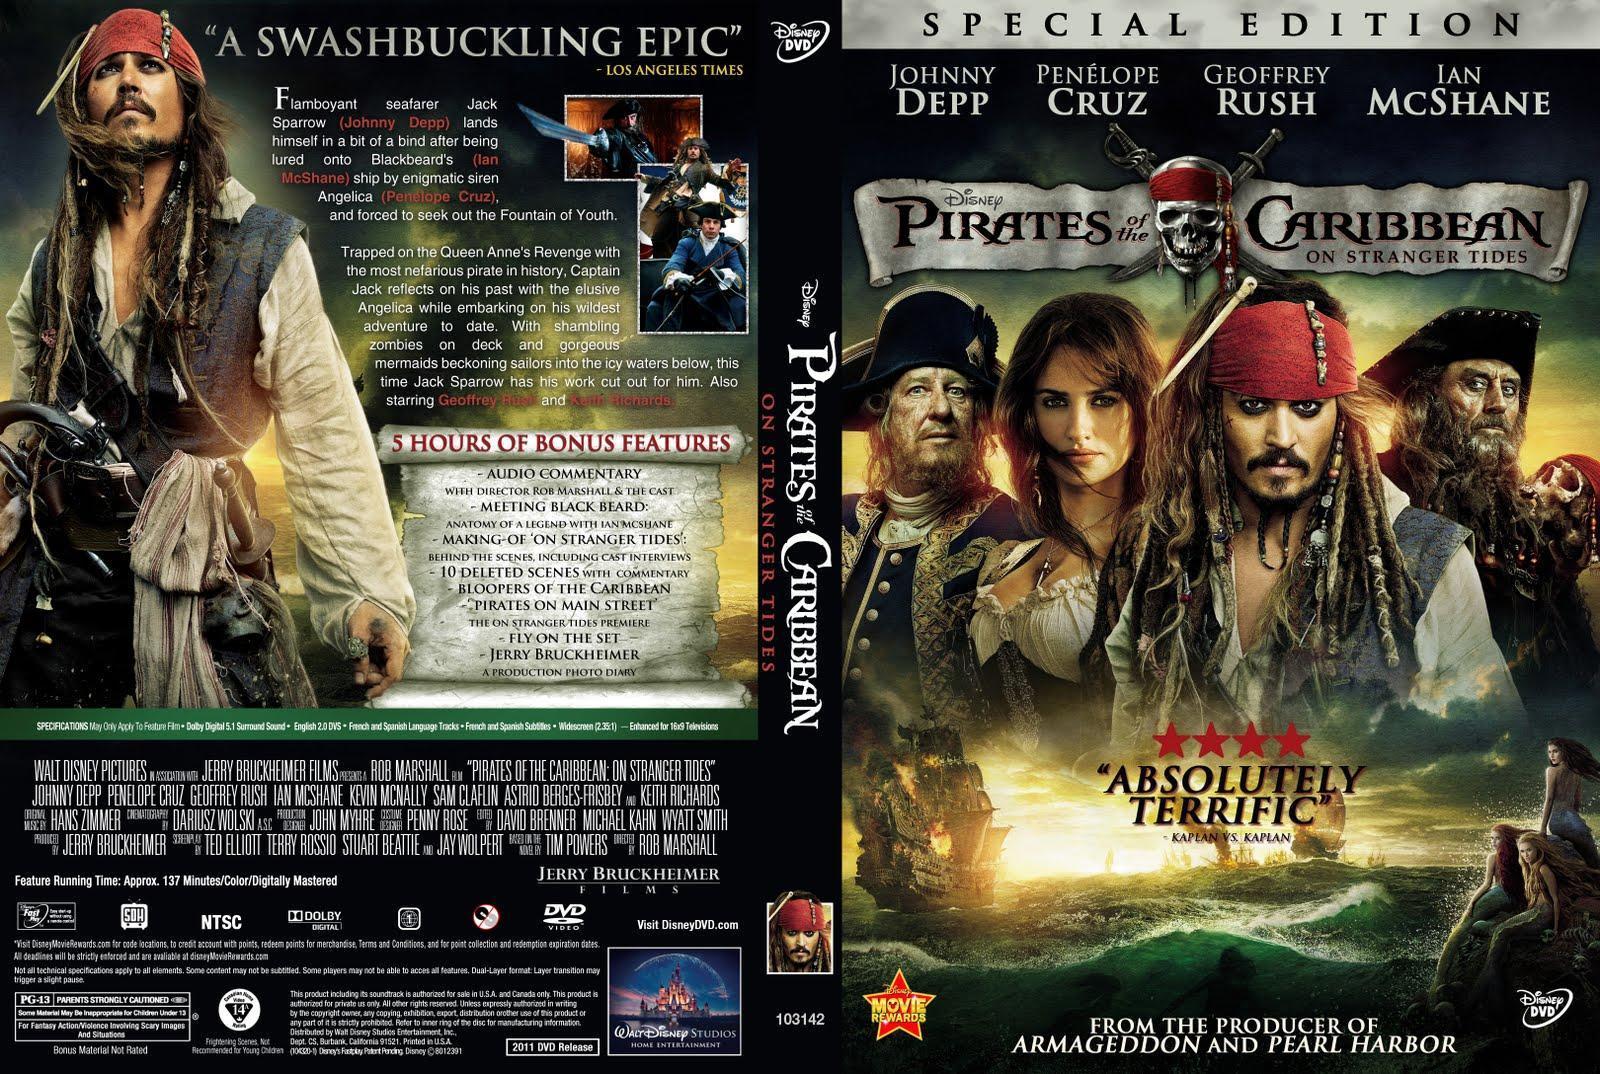 On The Pirates Cover On The Back